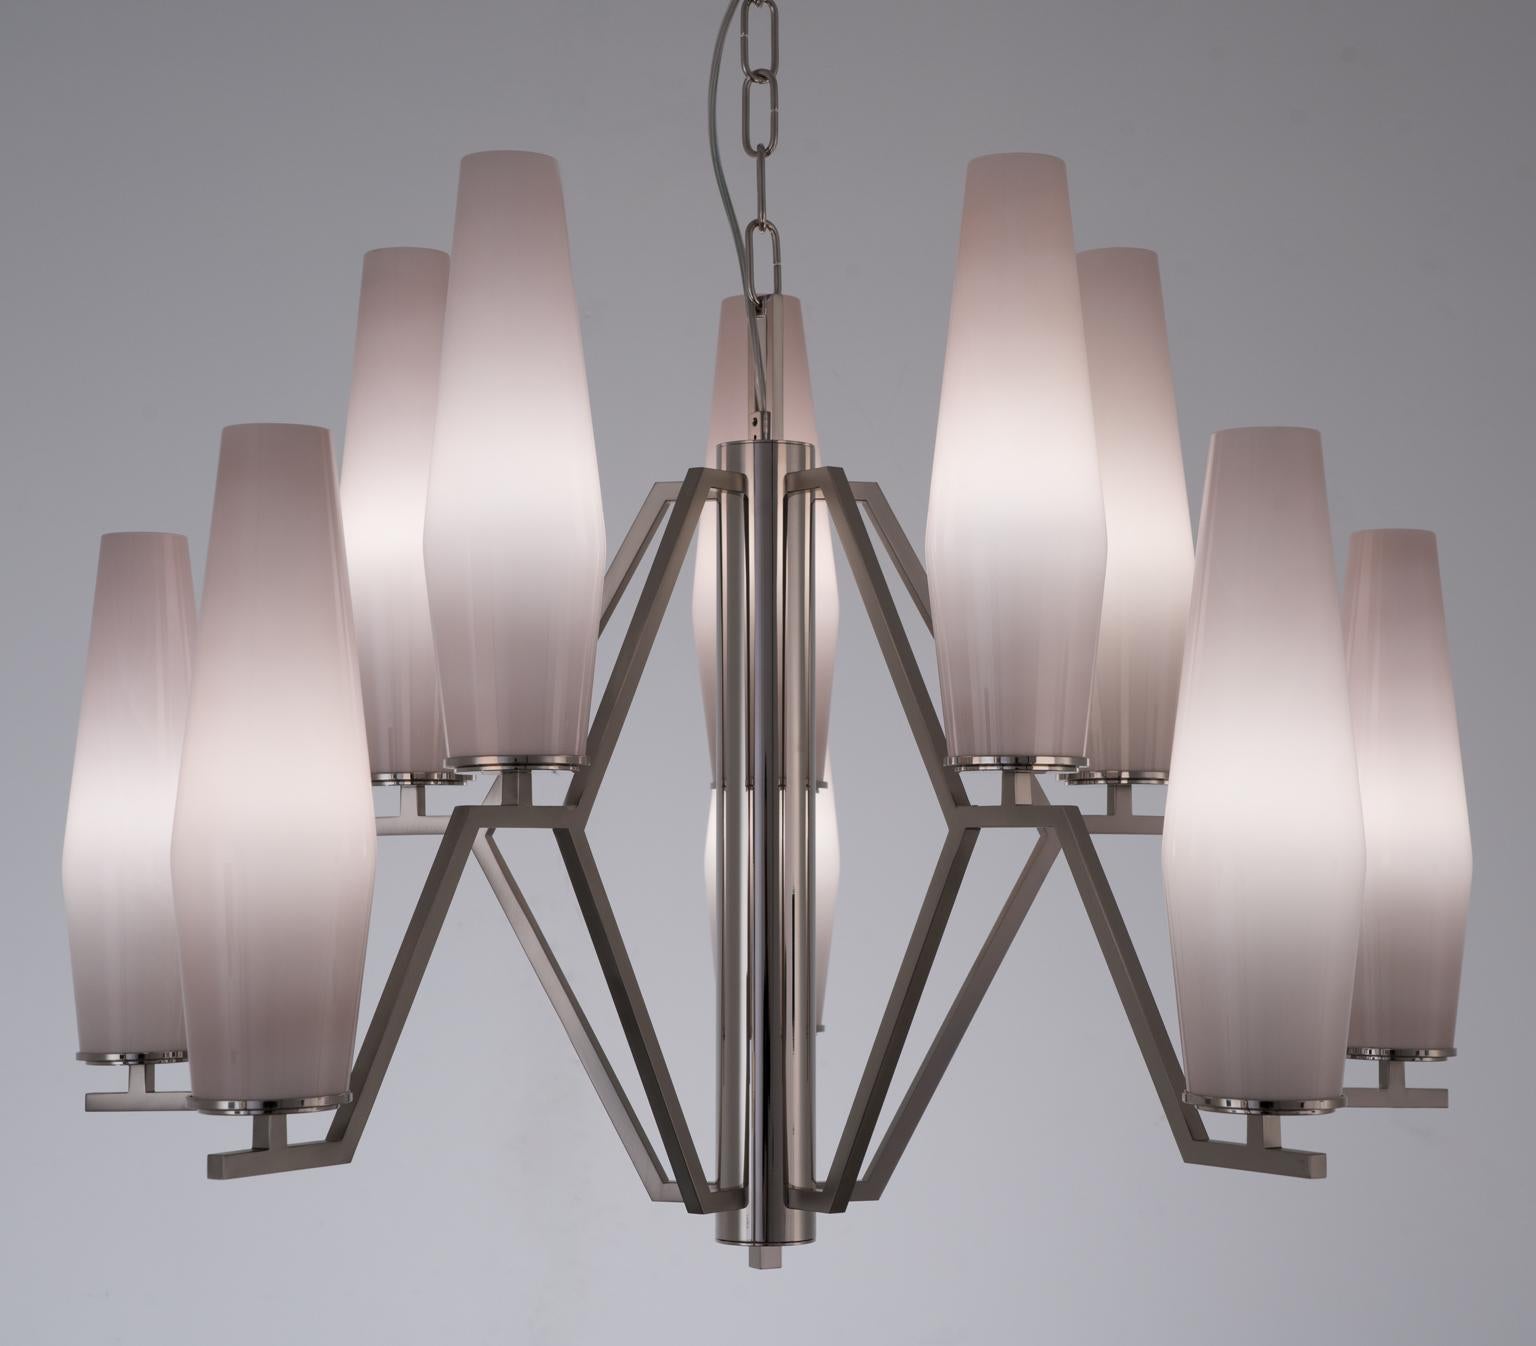 A chandelier with a sober and discreet elegance. Devoid of any concessions to decorations, hence capable of resonating both in Classic and modern contexts. It combines strength and grace, with coexisting smooth and angular lines, just like Frida